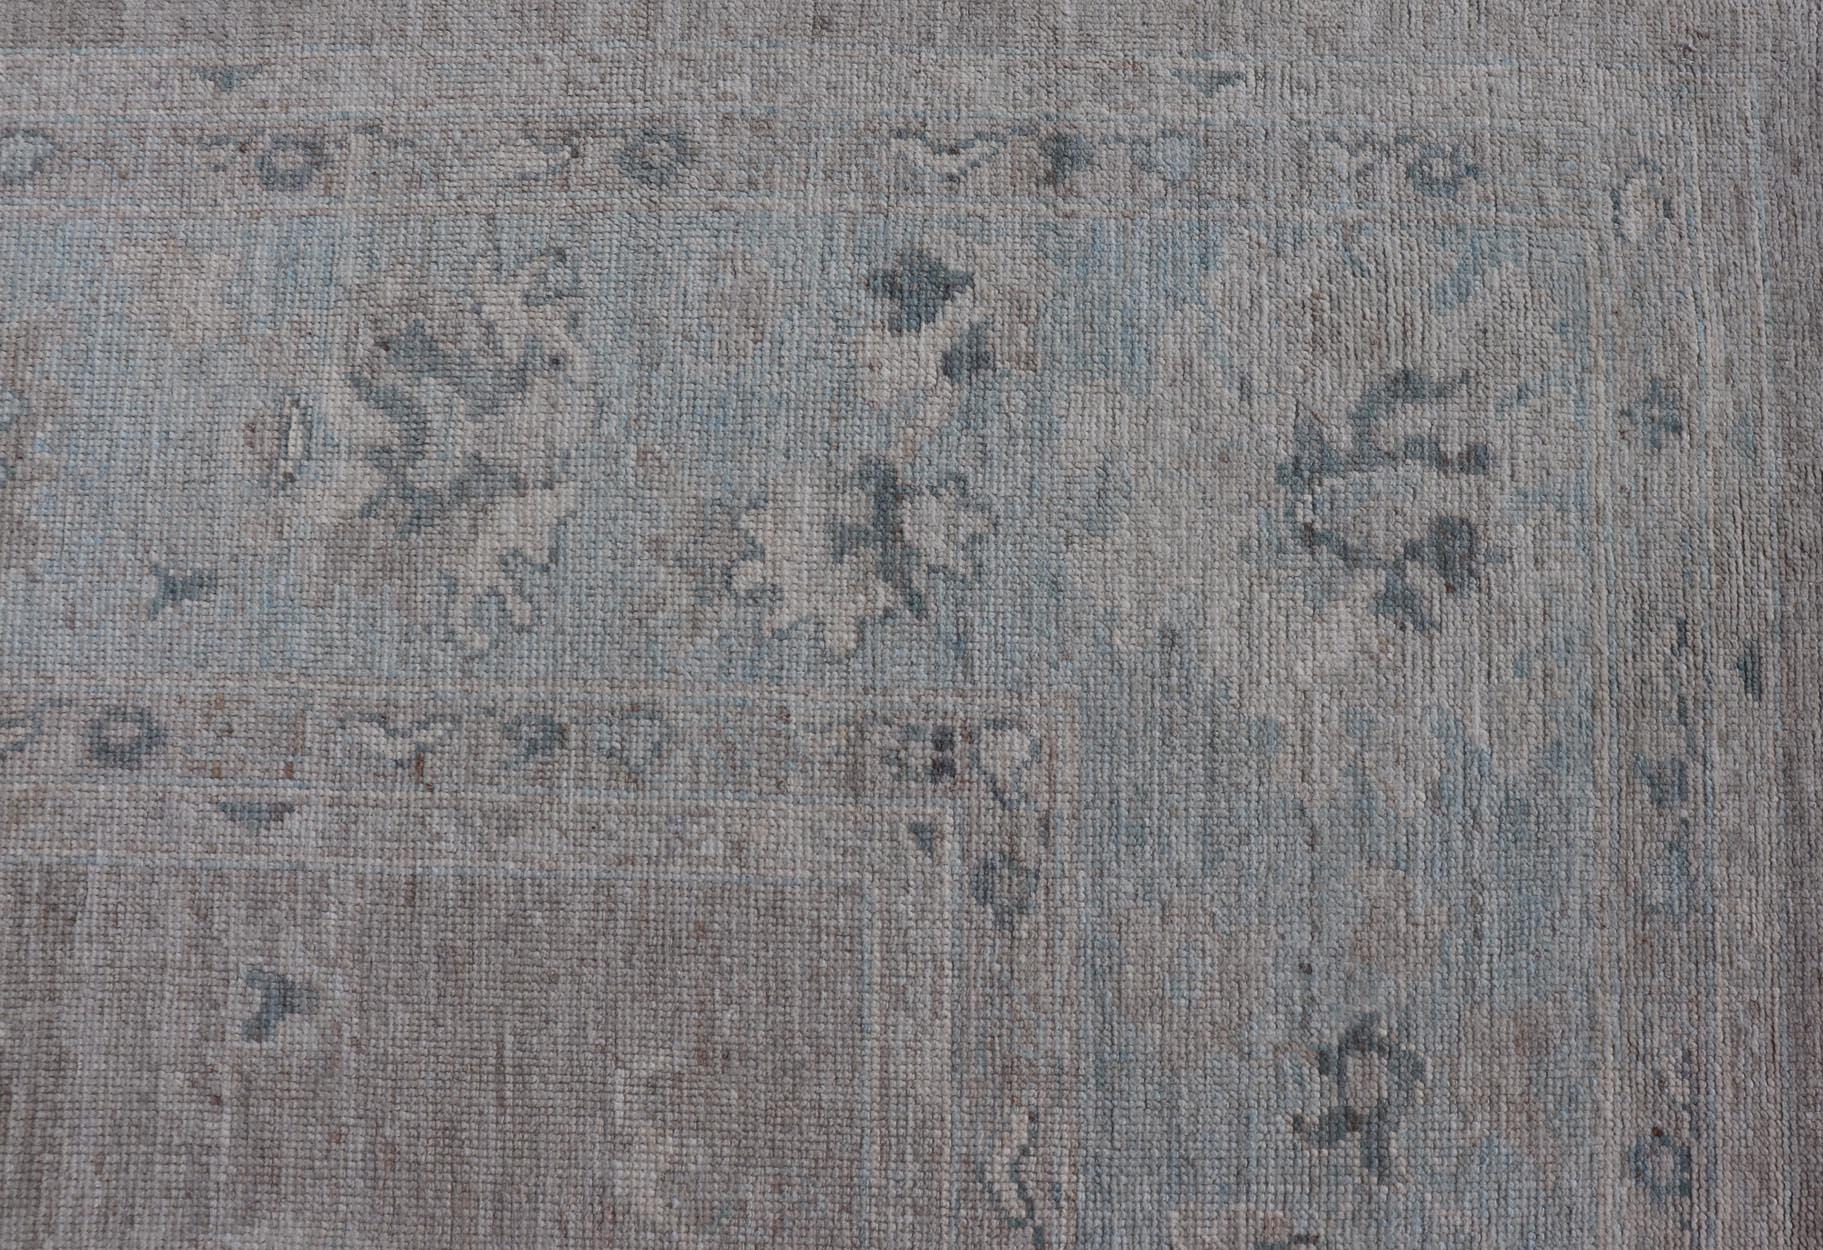 Large Modern Oushak with Floral Motifs in Wheat, Mushroom, Grey & Light Blue 9